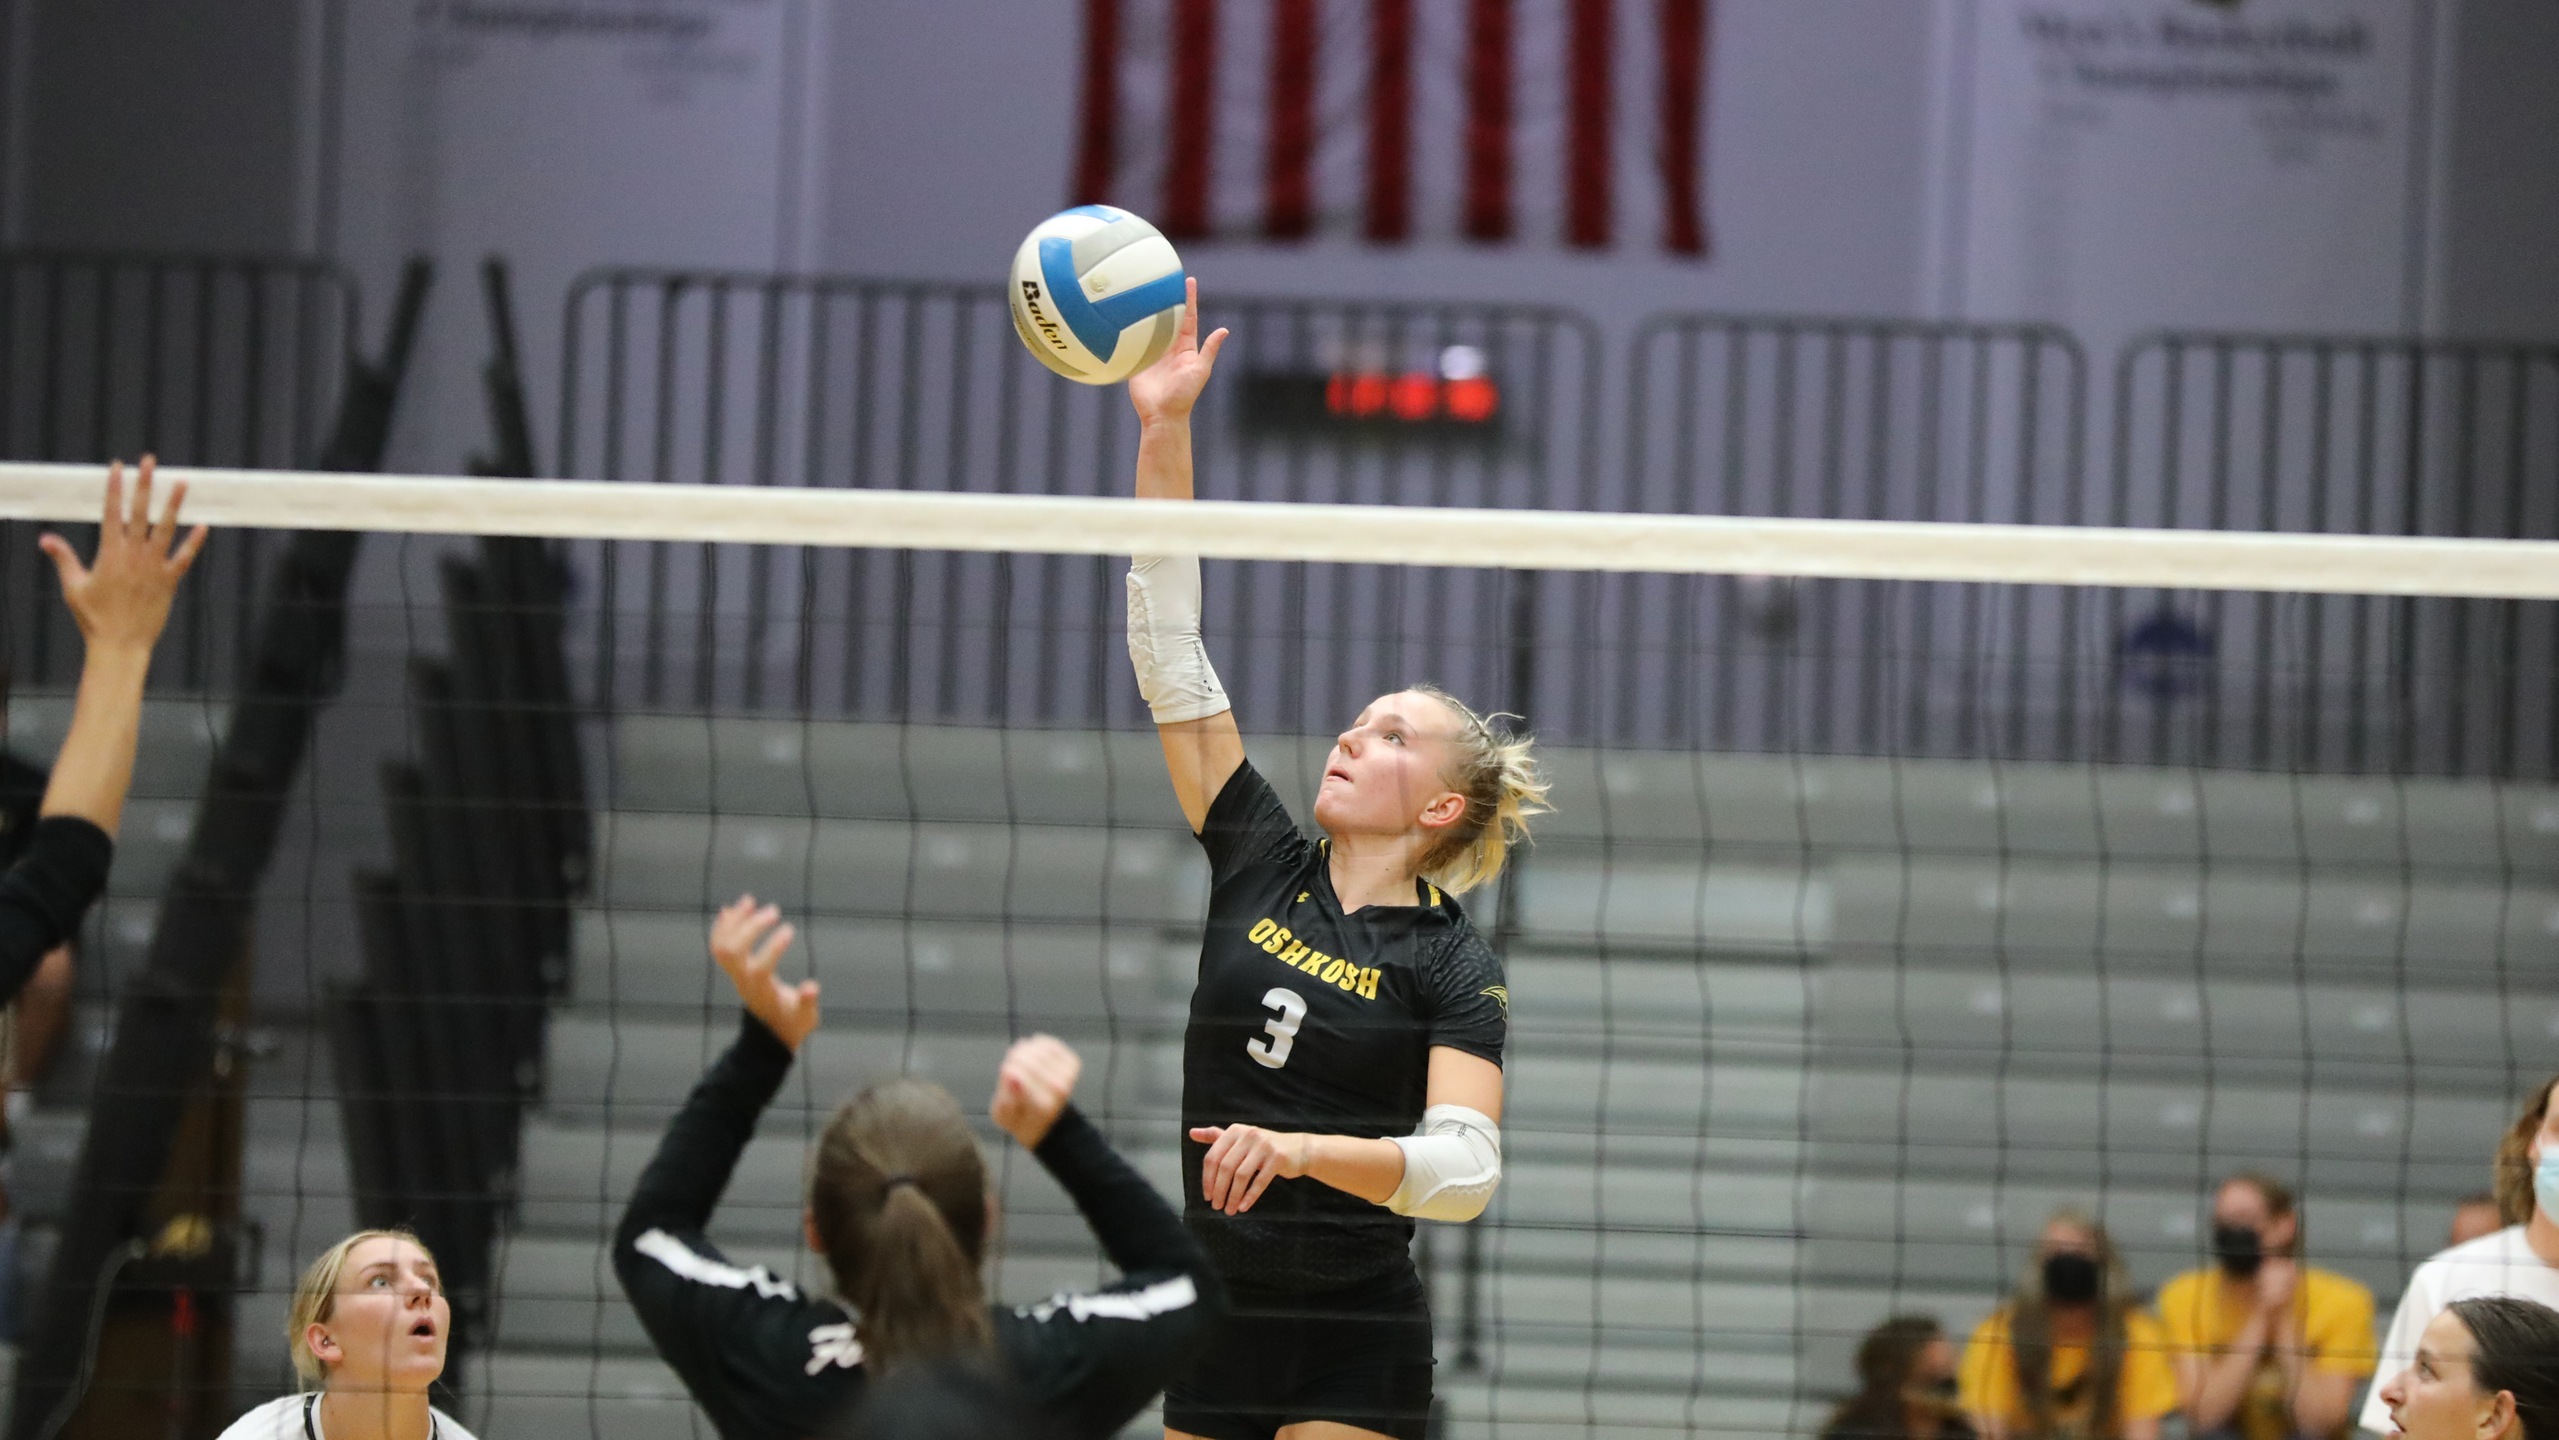 Carissa Sundholm had 11 kills and 13 digs during the Titans' 3-1 victory over nationally ranked University of Chicago.